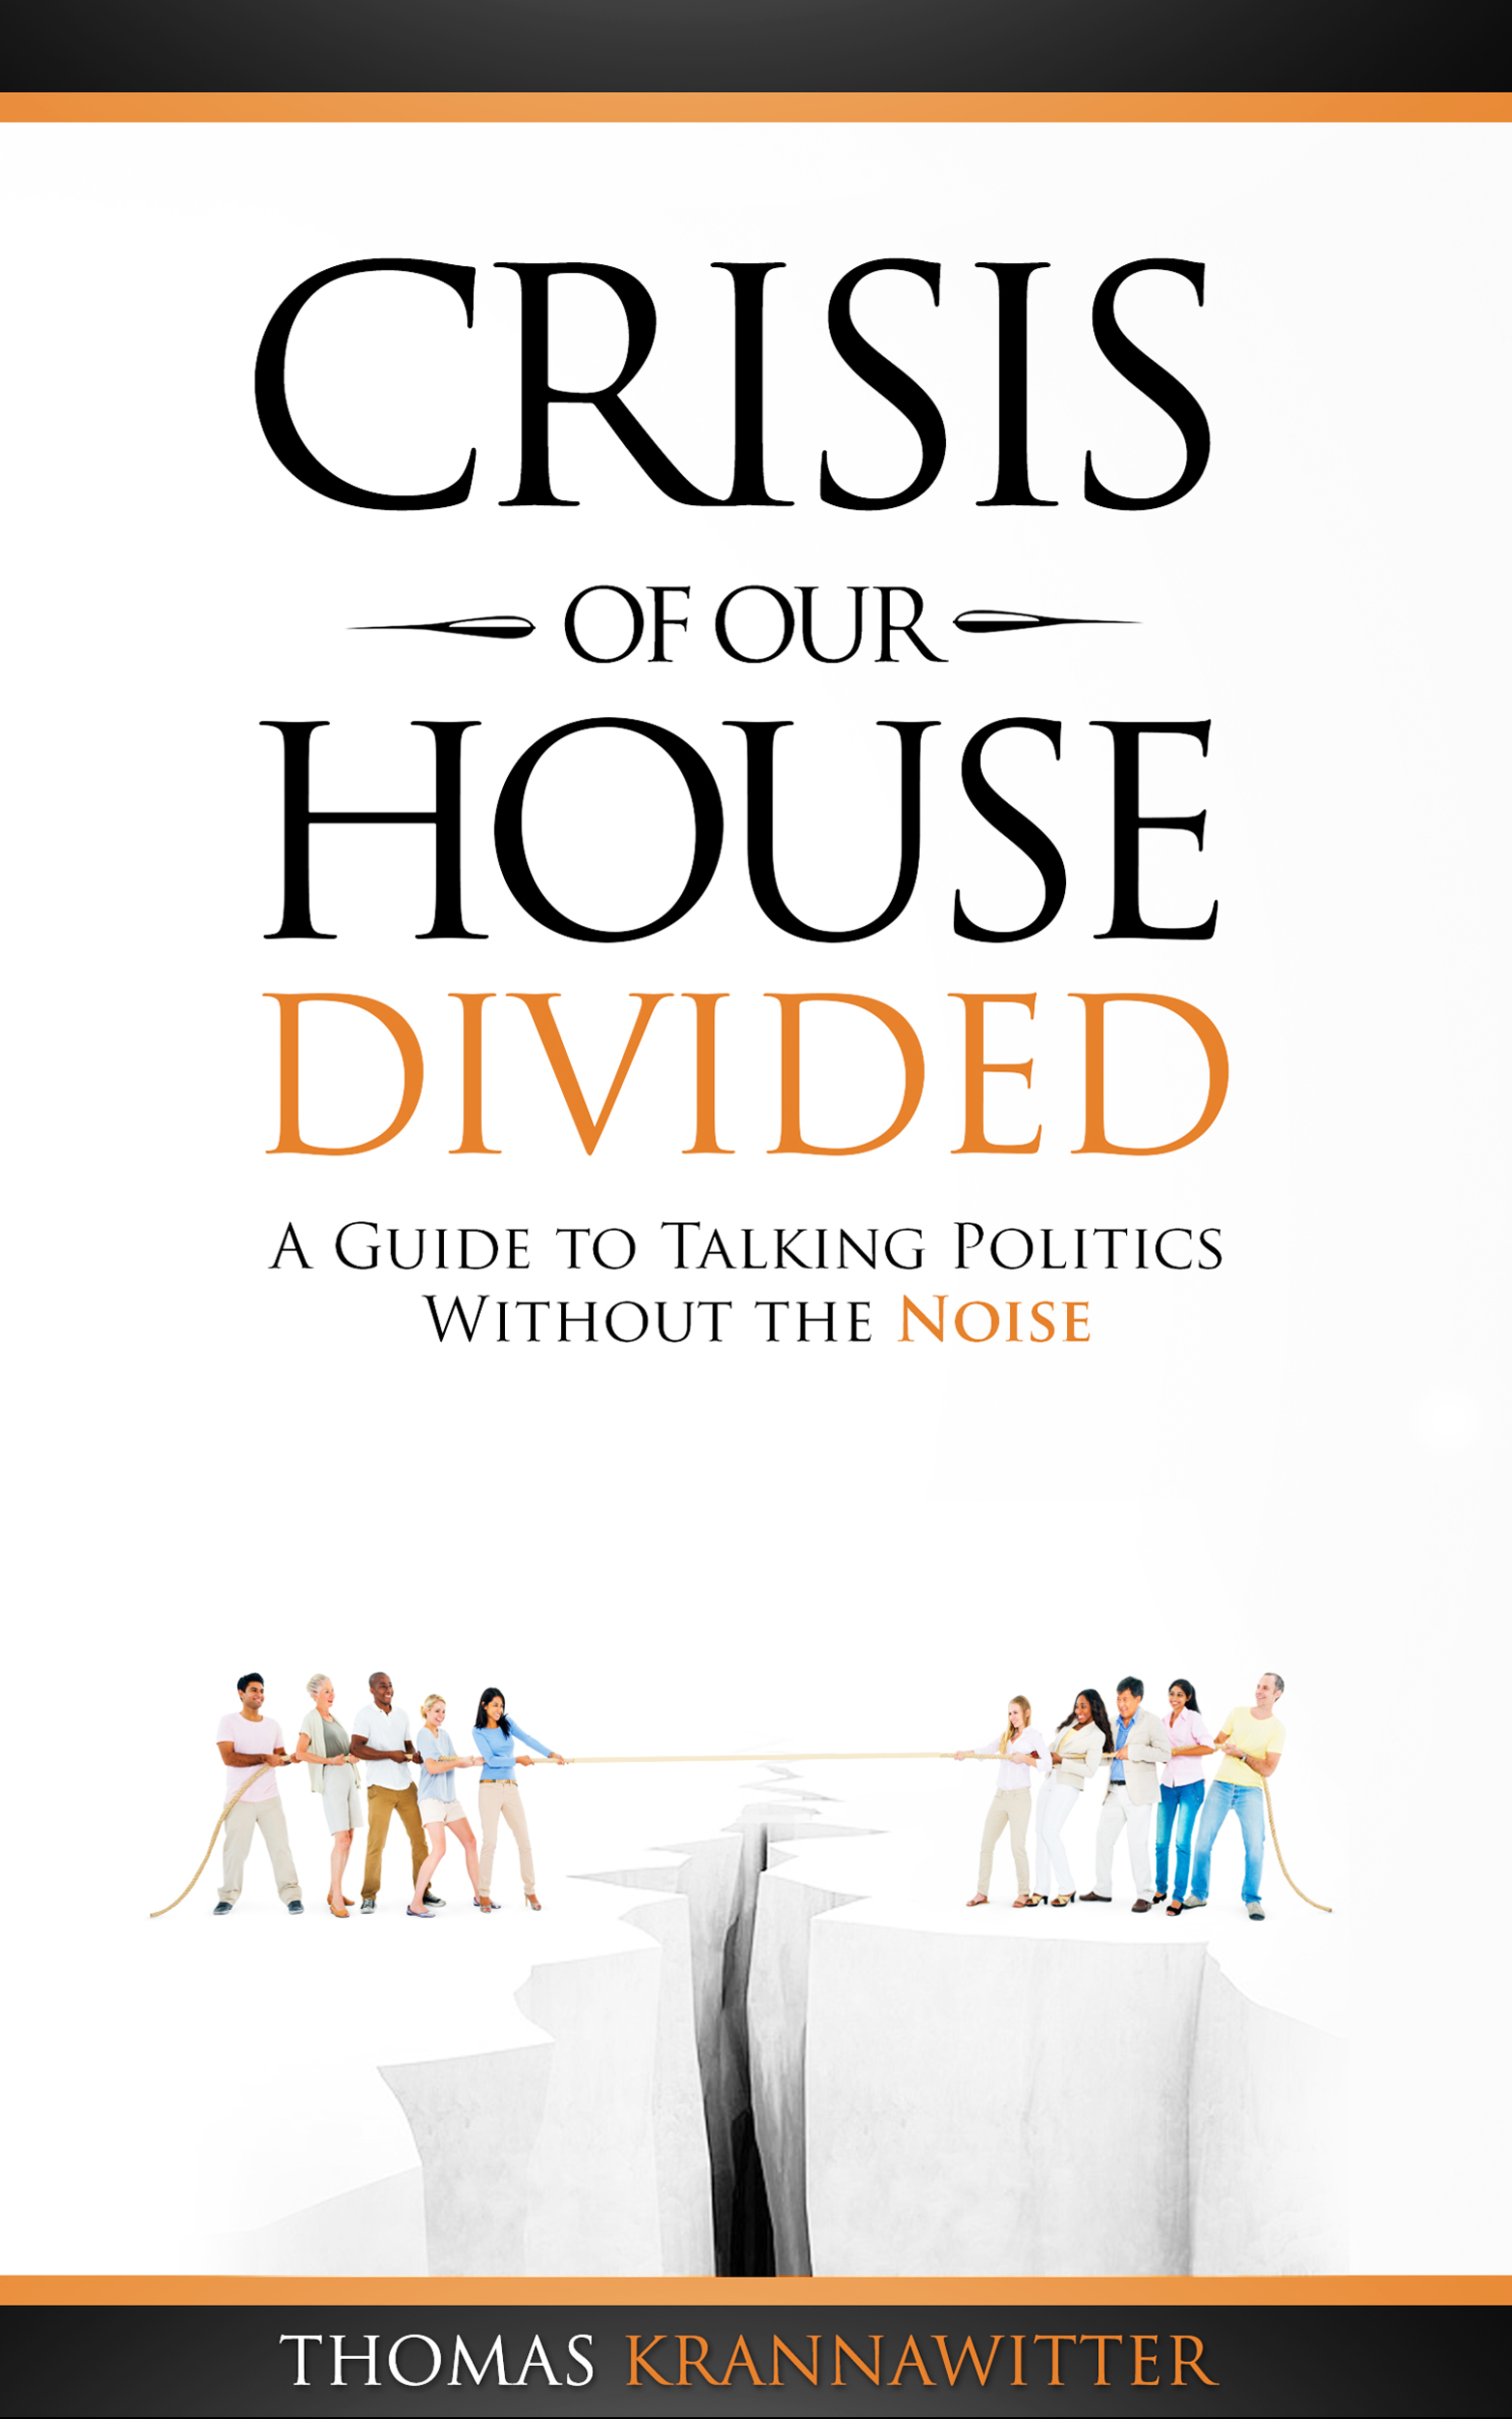 Crisis of Our House Divided: A Guide to Talking Politics Without the Noise